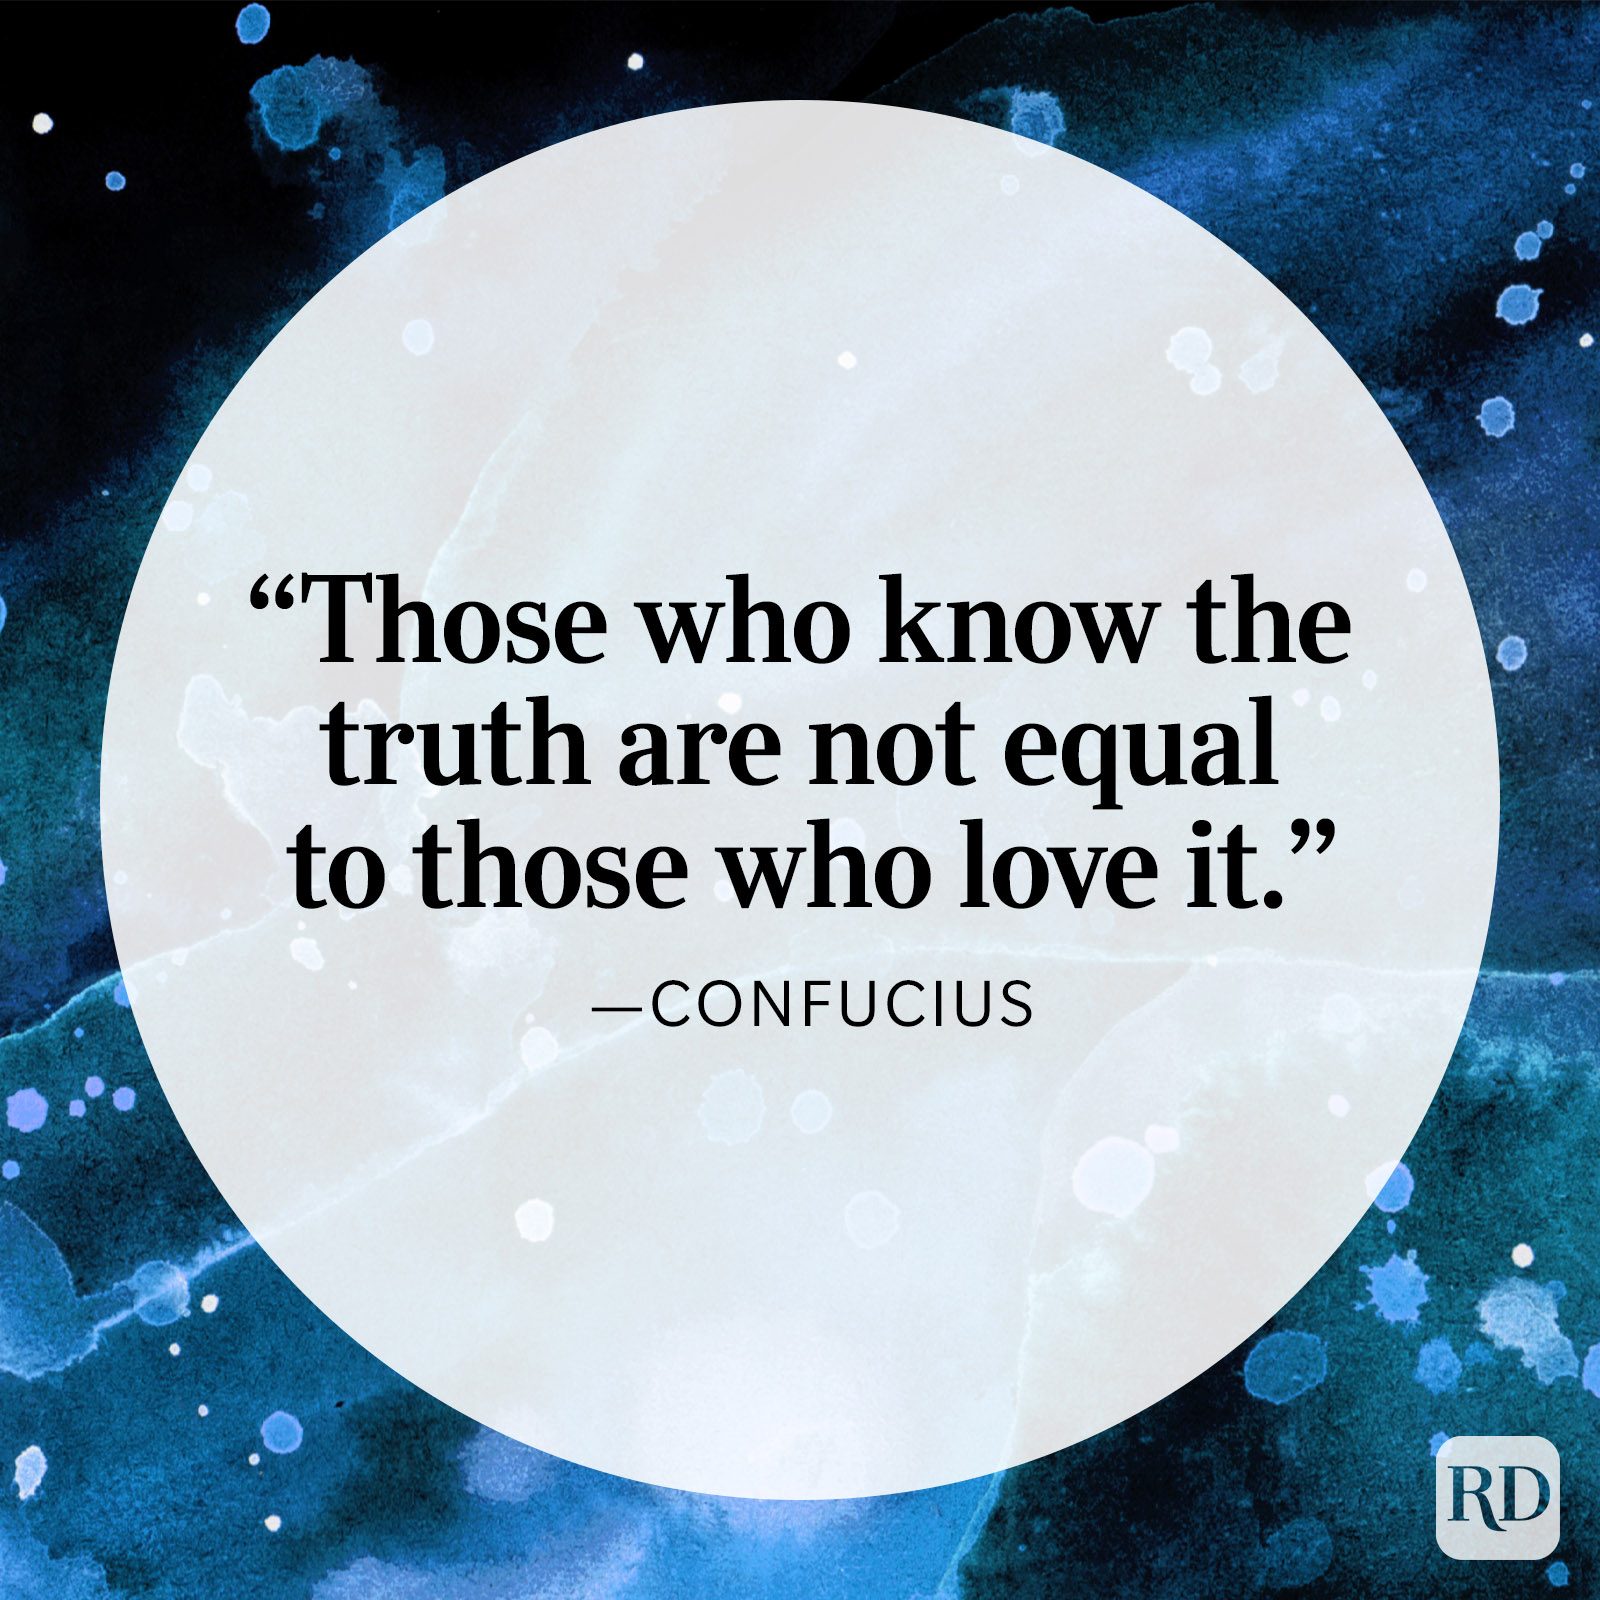 75 Inspiring and Eye-Opening Truth Quotes